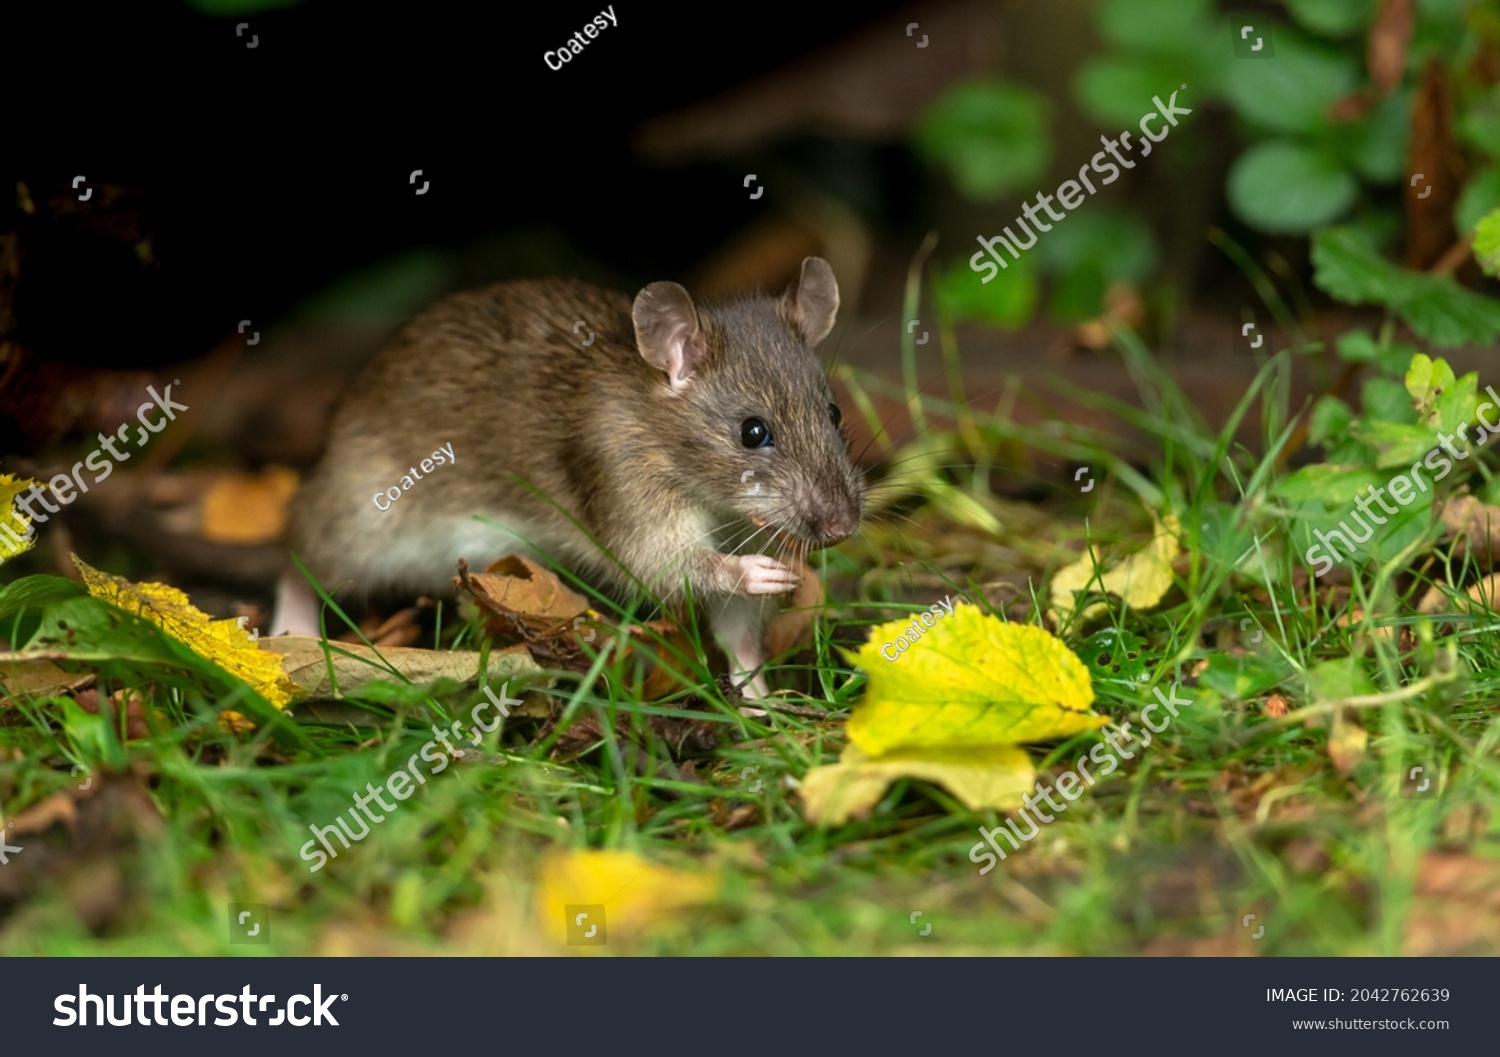 Close up of a wild brown rat in Autumn foraging and eating seeds in natural woodland habitat.   Facing right.  Horizontal.  Copy space.  Scientific name: Rattus norvegicus. #2042762639